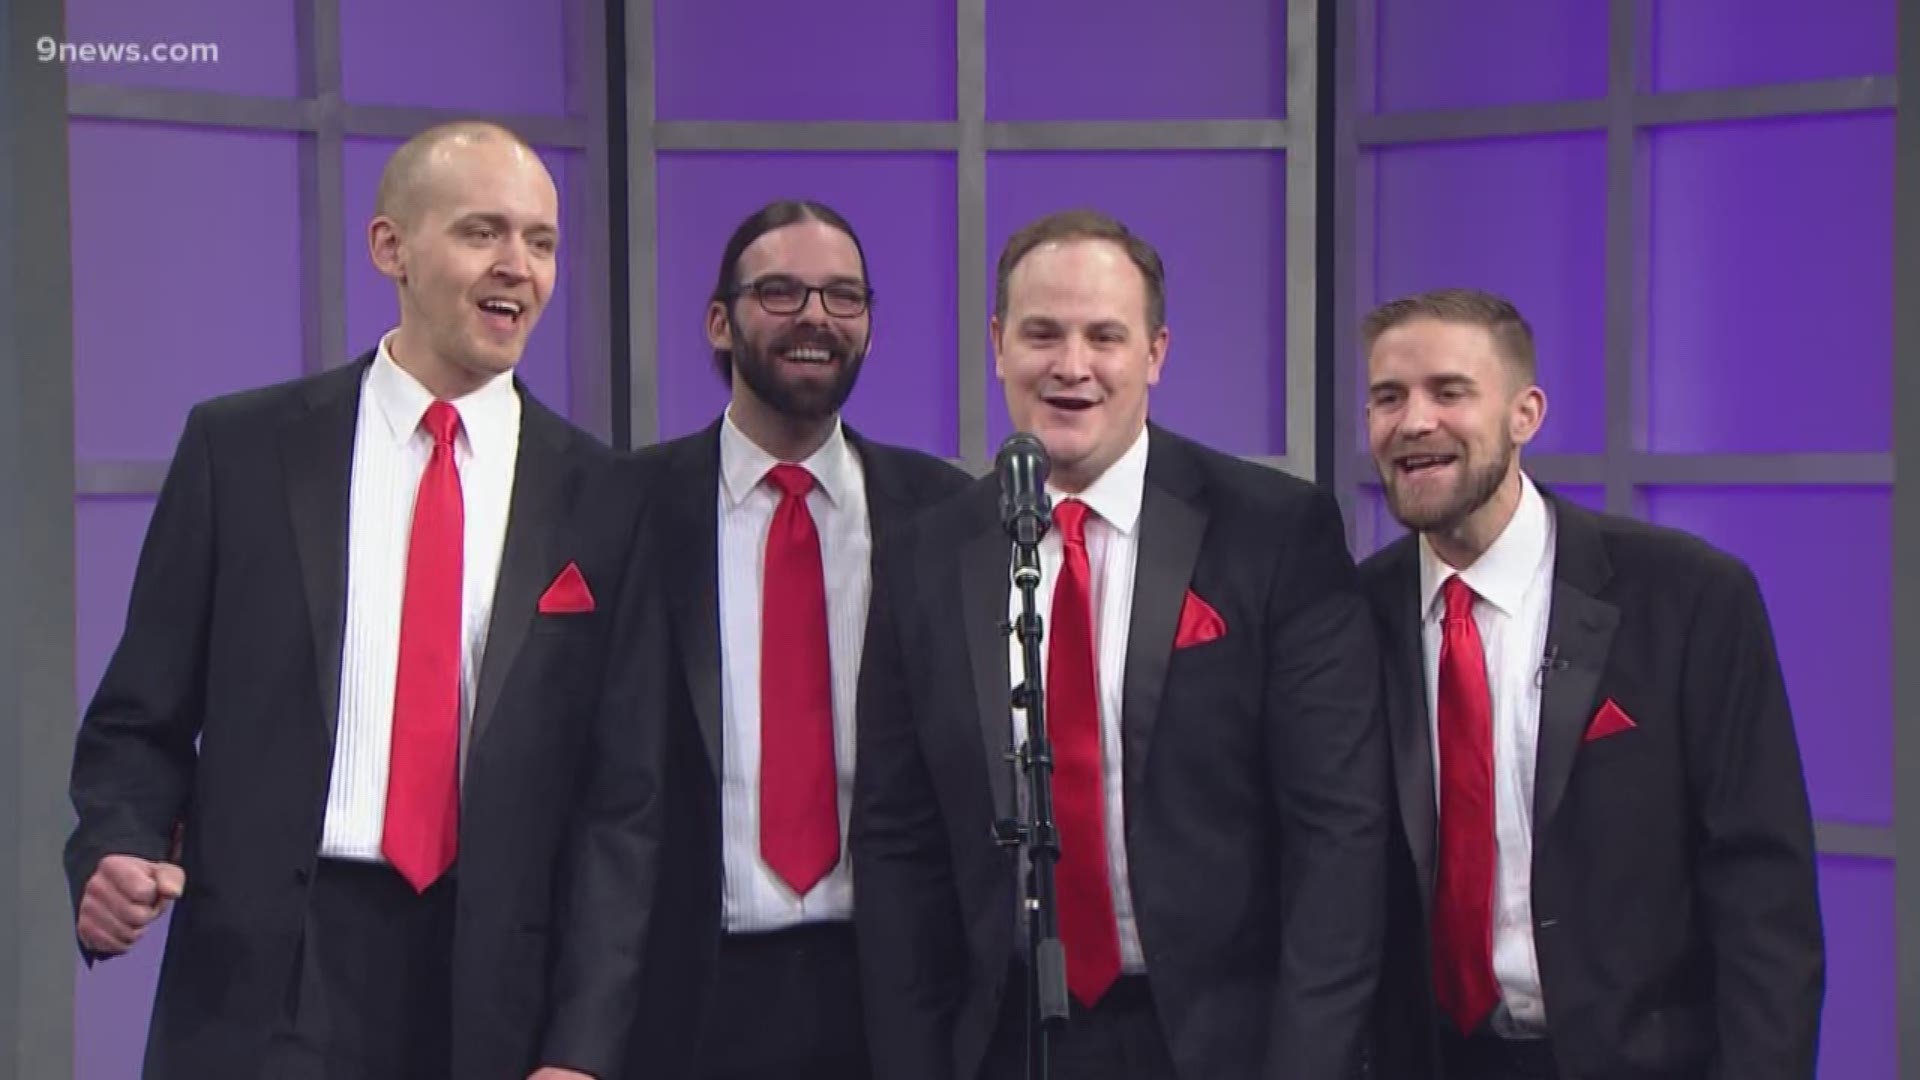 Sound of the Rockies can send four dapper men in tuxedos to your loved one’s home or place of work to deliver them a singing telegram this Valentine's Day.